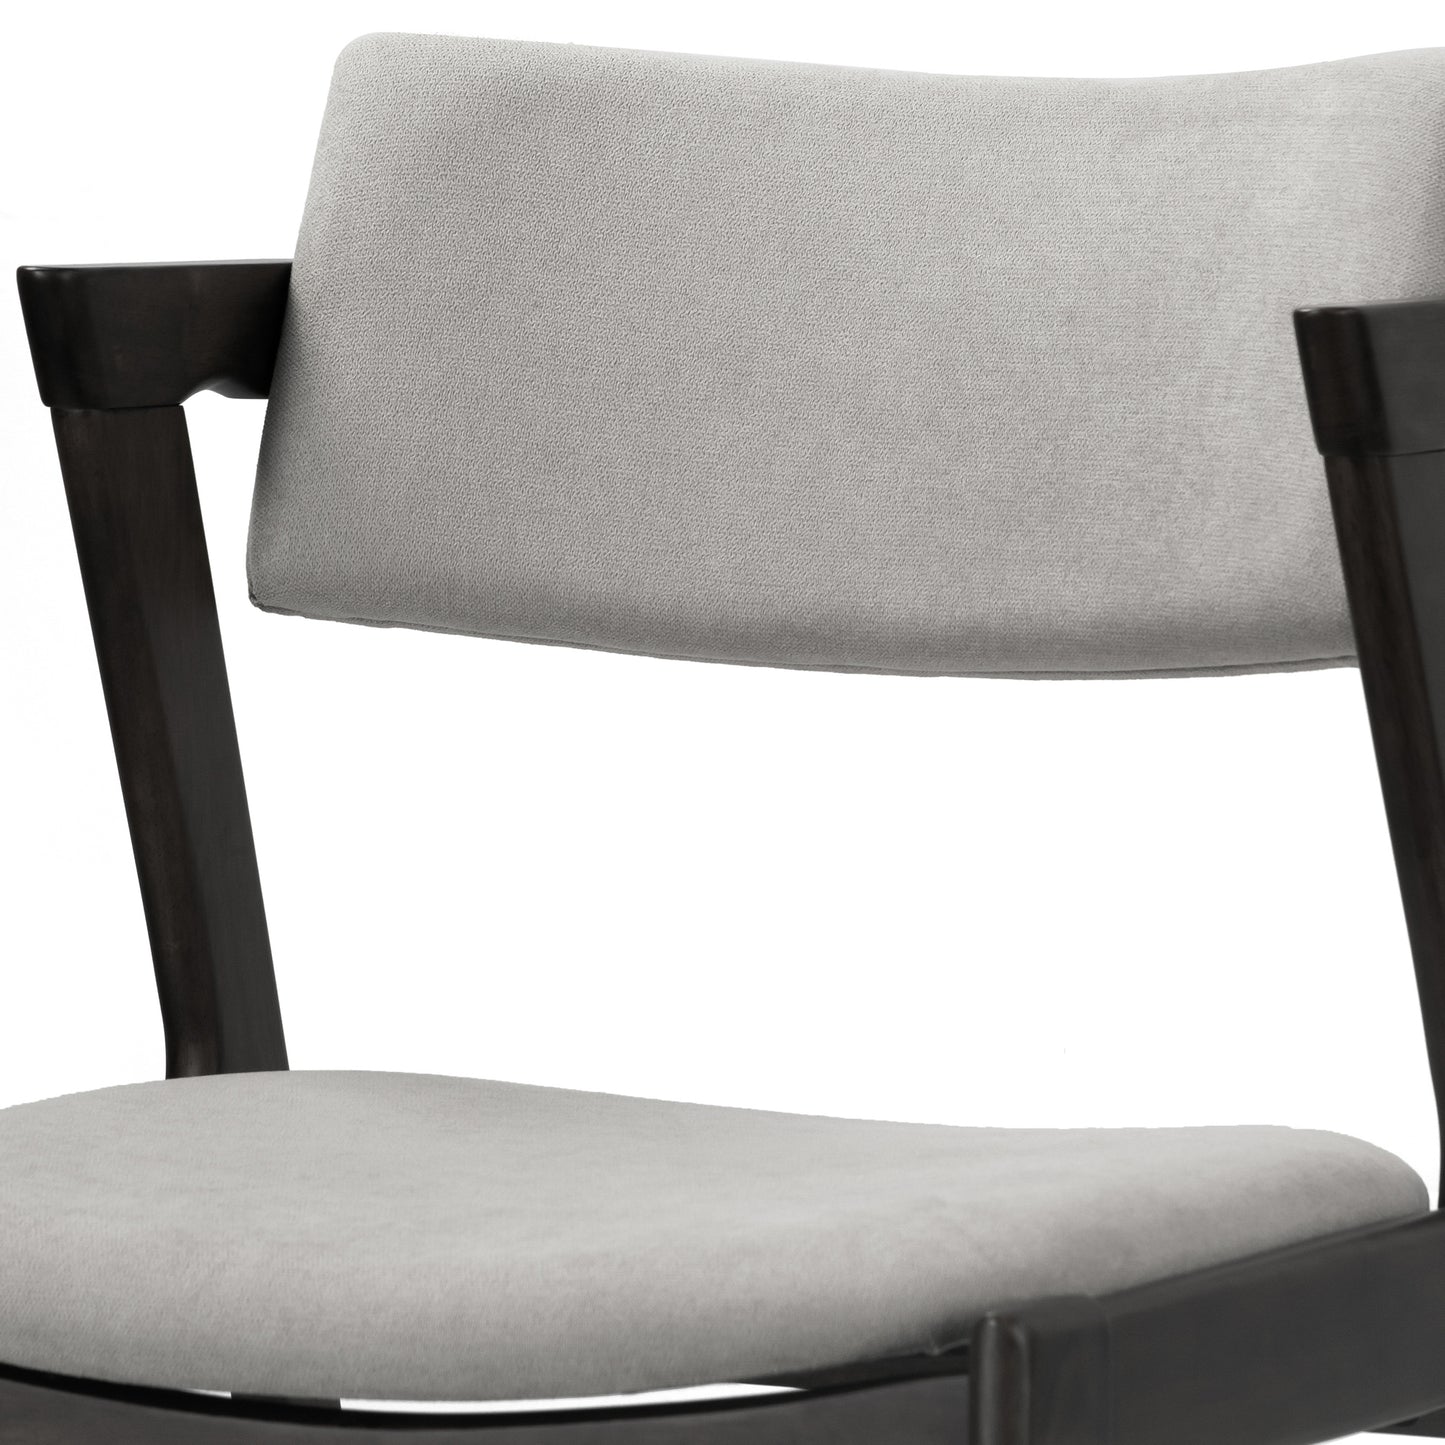 Set of 2 Auden Retro Modern Black Wood Wing Chair with Light Grey Fabric Seat